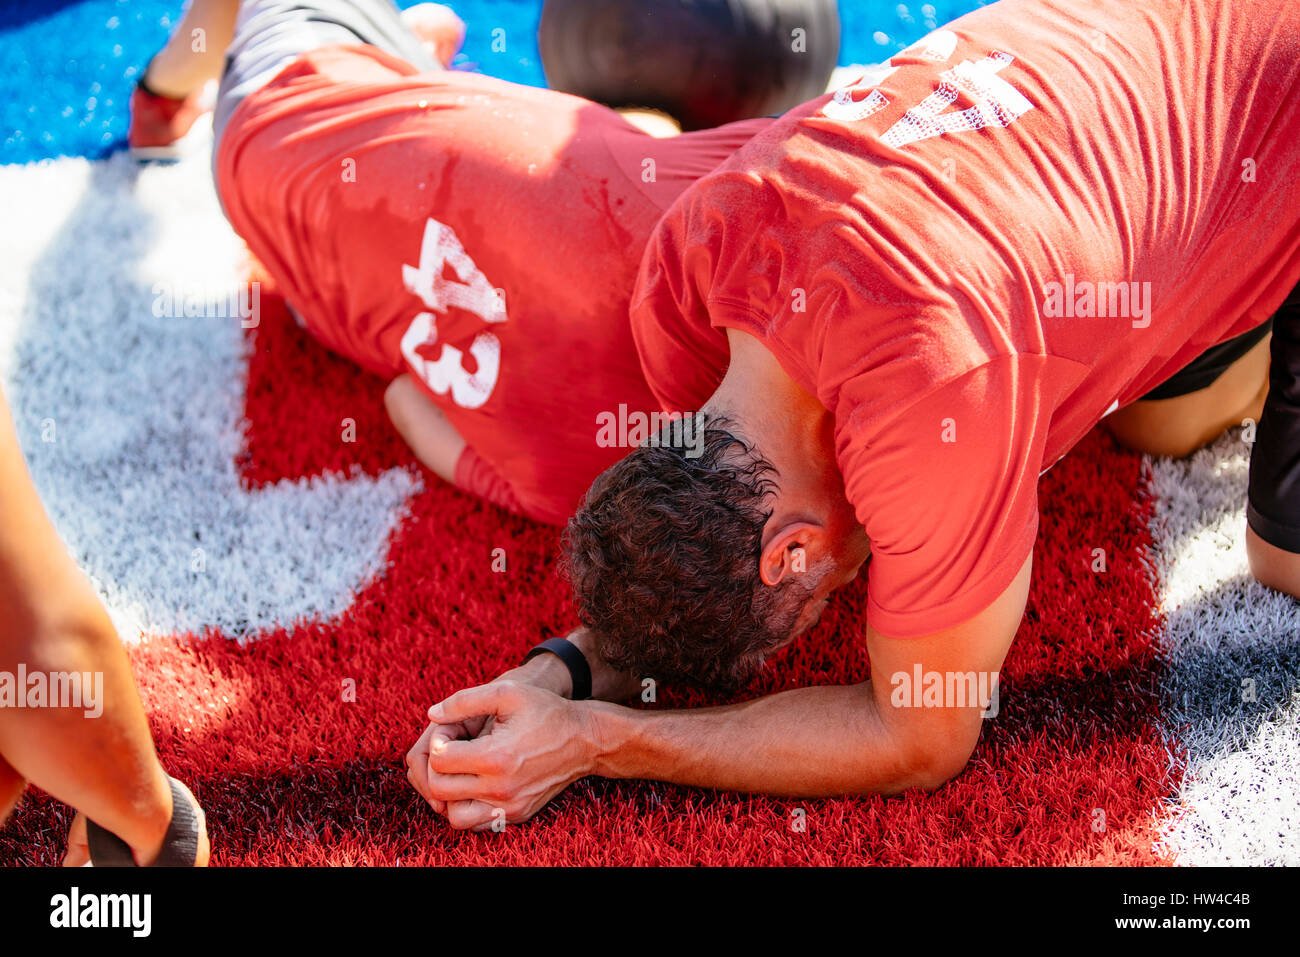 Fatigued men resting on artificial turf field Stock Photo